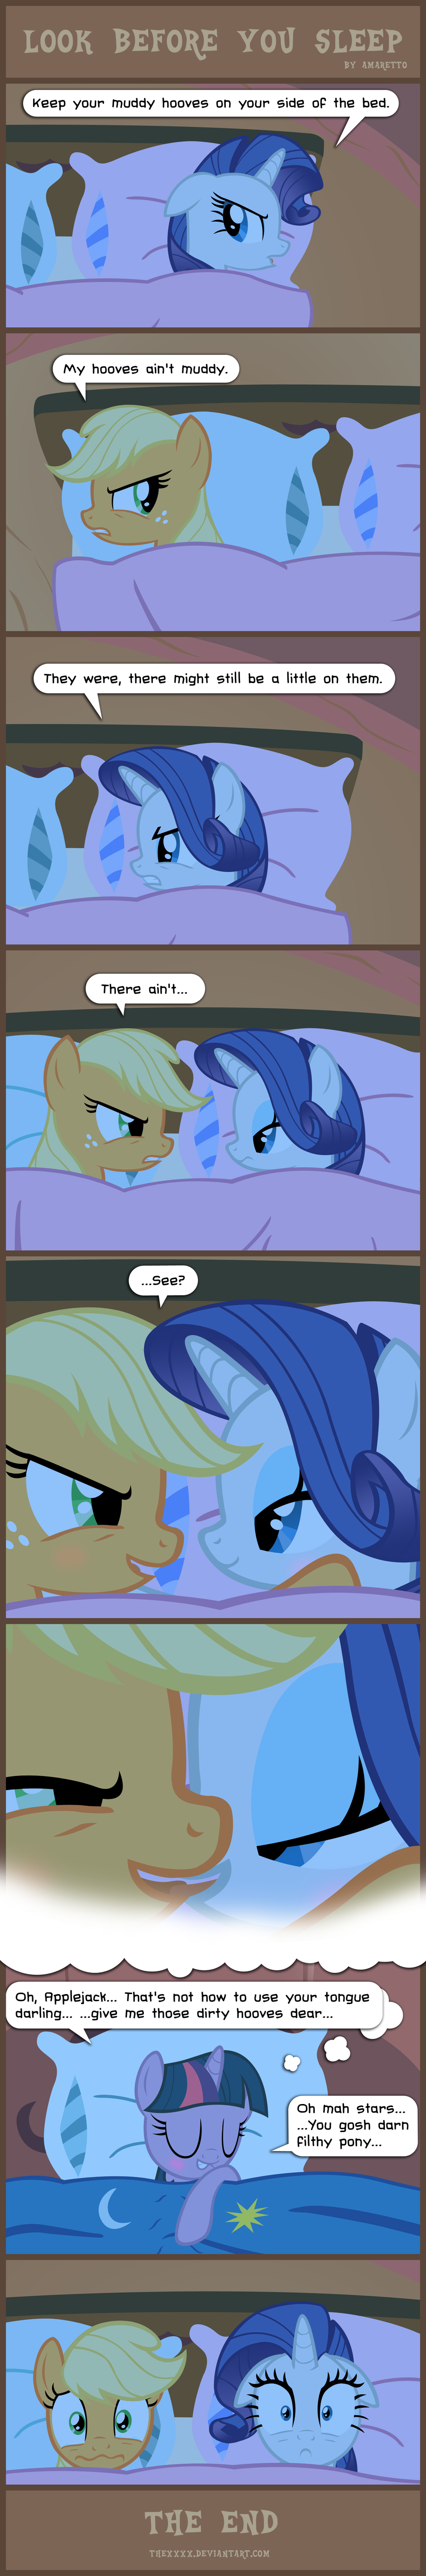 [Image: look_before_you_sleep_by_thexxxx-d49yycm.png]